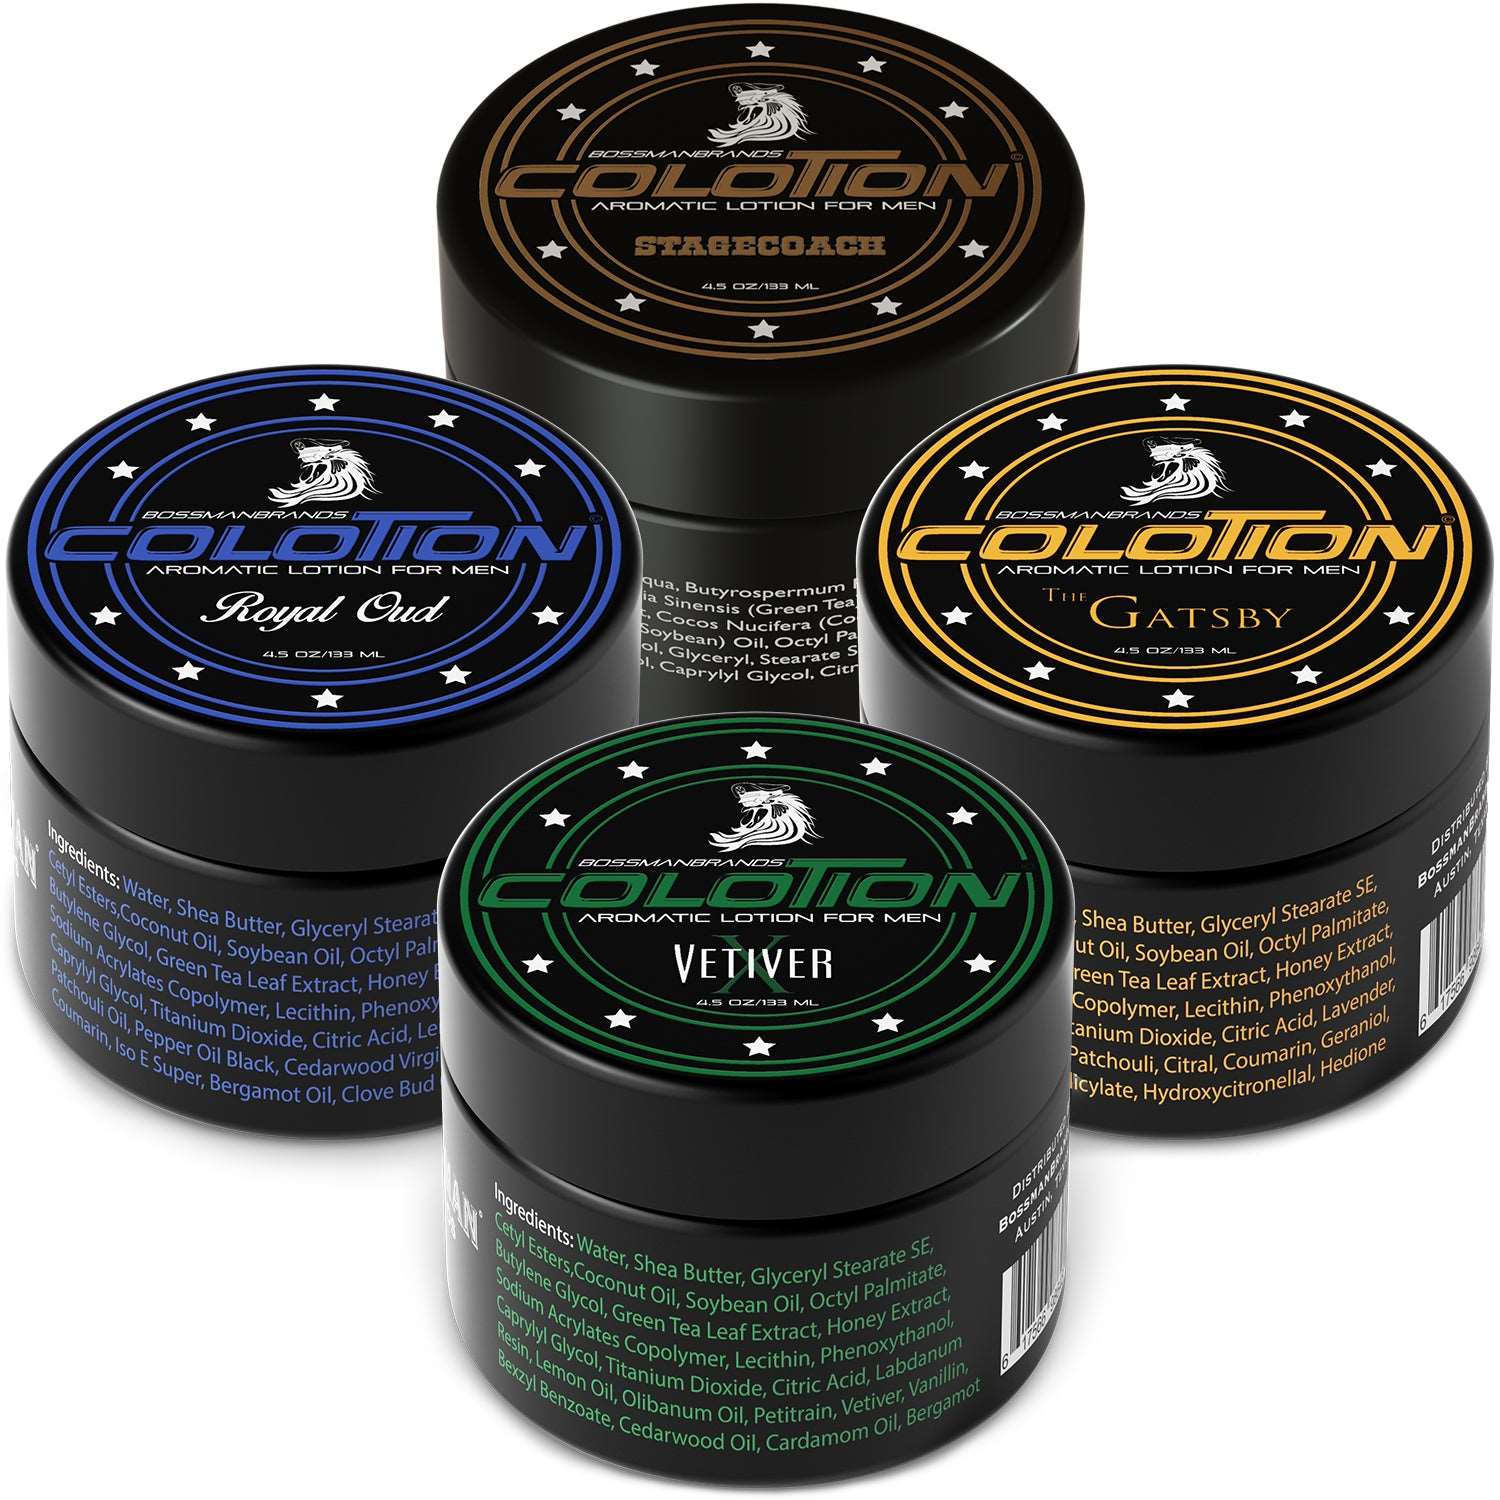 Colotion - Variety Pack (Vetiver X, The Gatsby, Royal Oud, Stagecoach) Bossman Brands